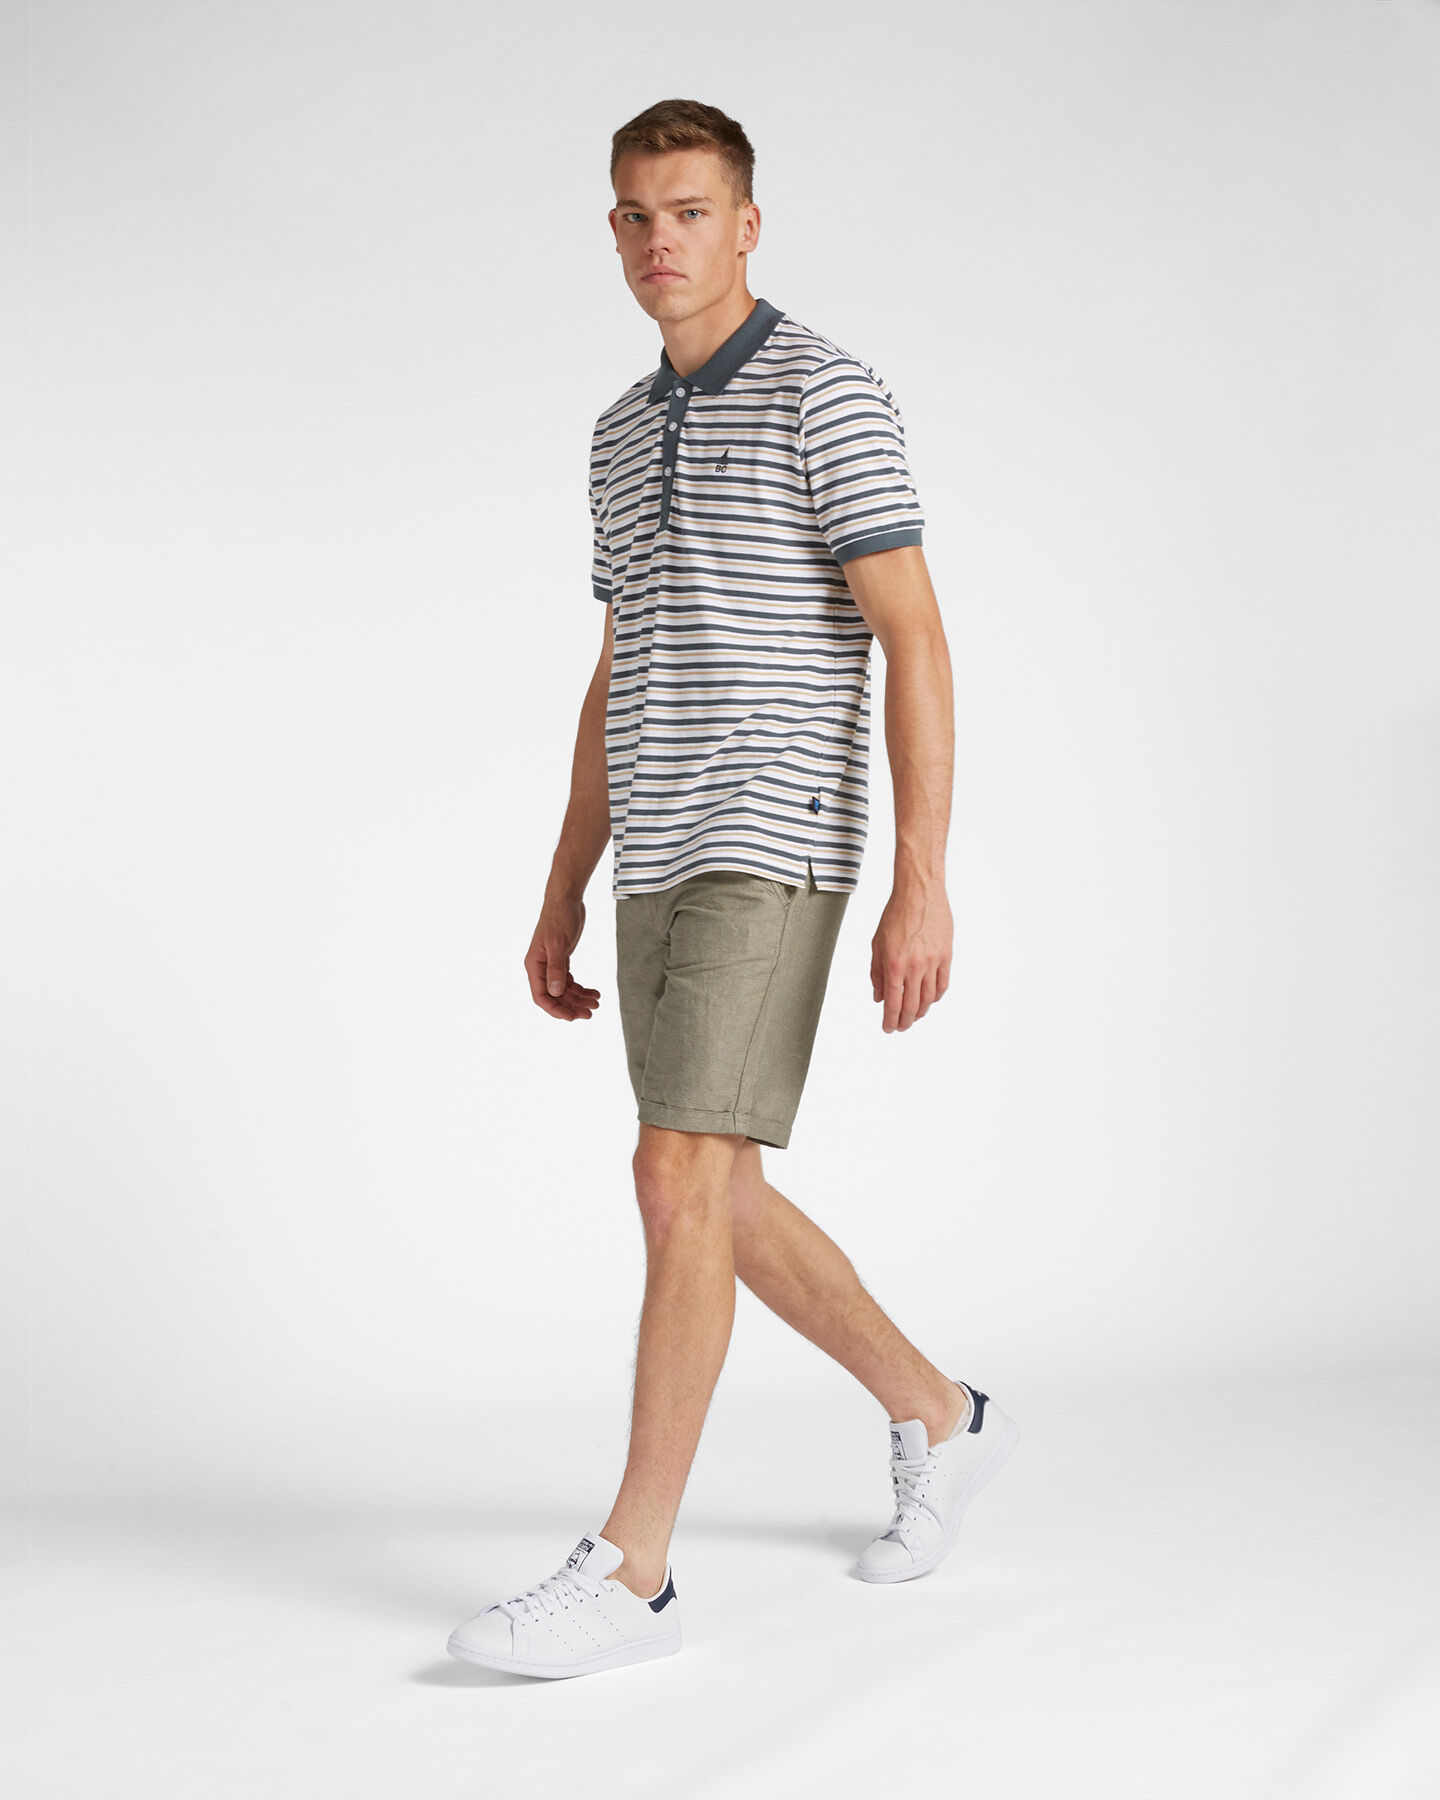  Polo BEST COMPANY HERITAGE M S4122349|790A|XXL scatto 3